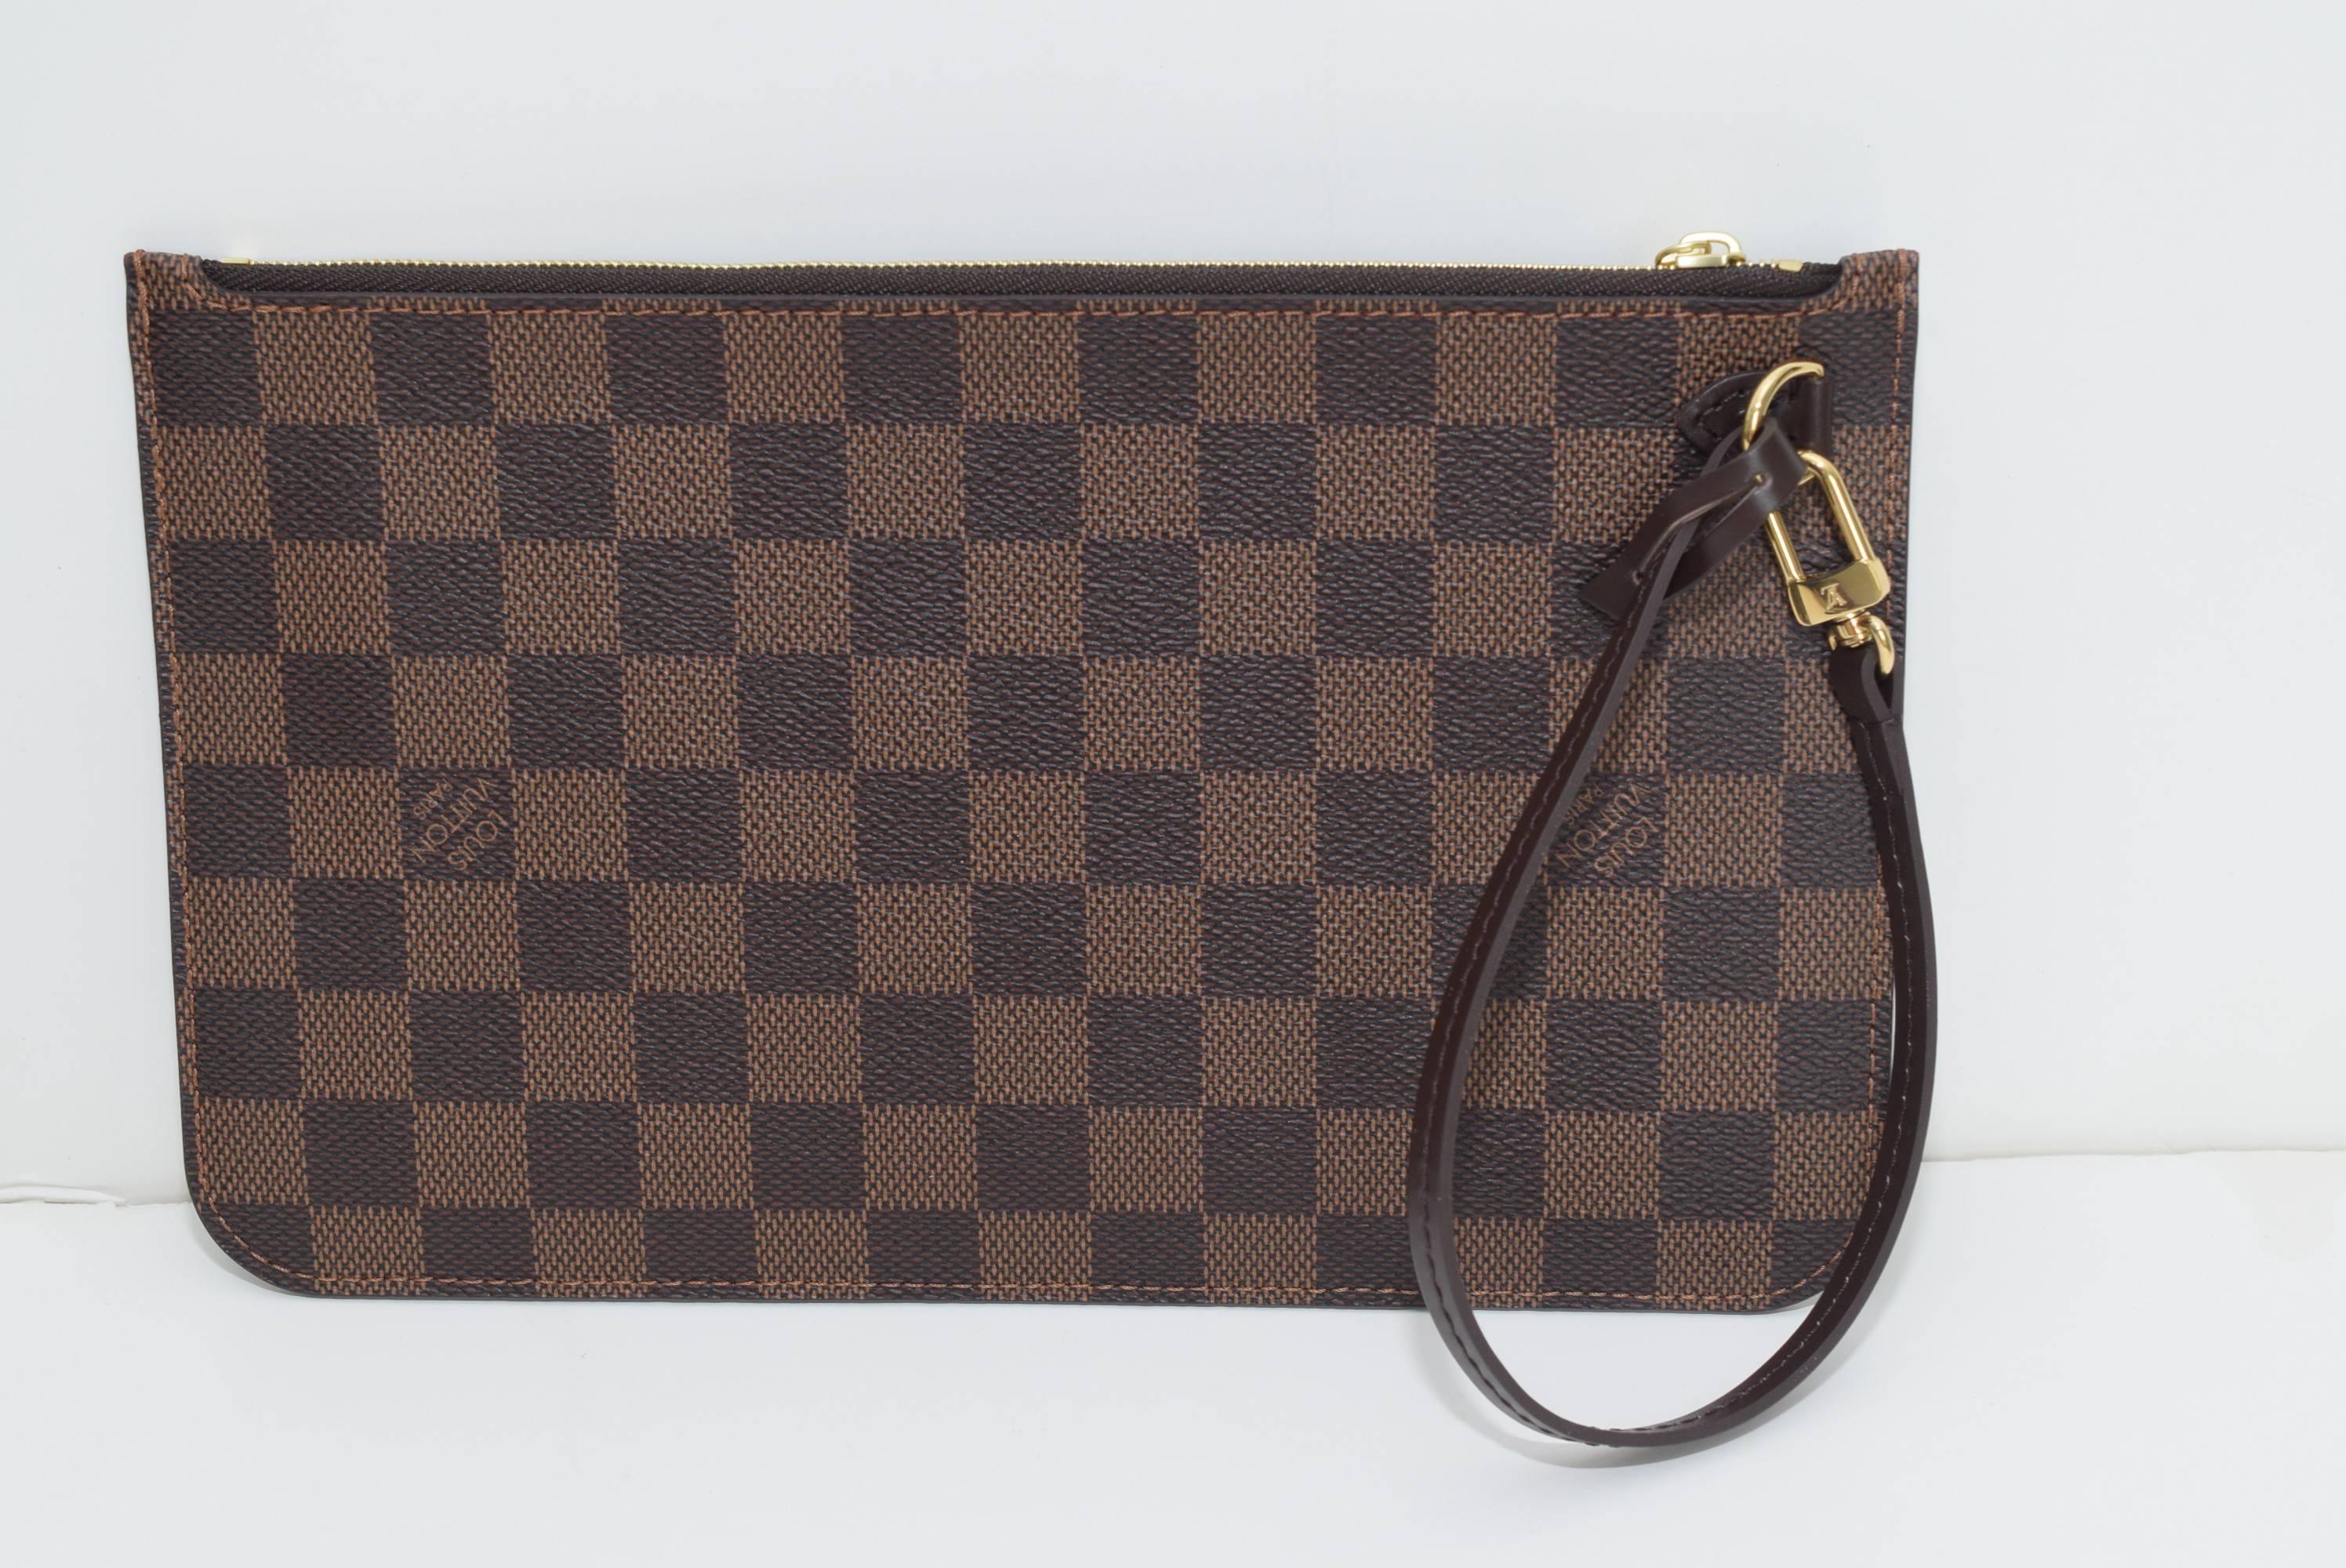 Brand new Louis Vuitton Neverfull Mm/ GM Pochette in Damier Ebene with cherry lining - date code AR4185. Made in France. Free priority shipping both ways.
 All of our bags are as stated. We ship within a day. Please check out our closet. We buy,